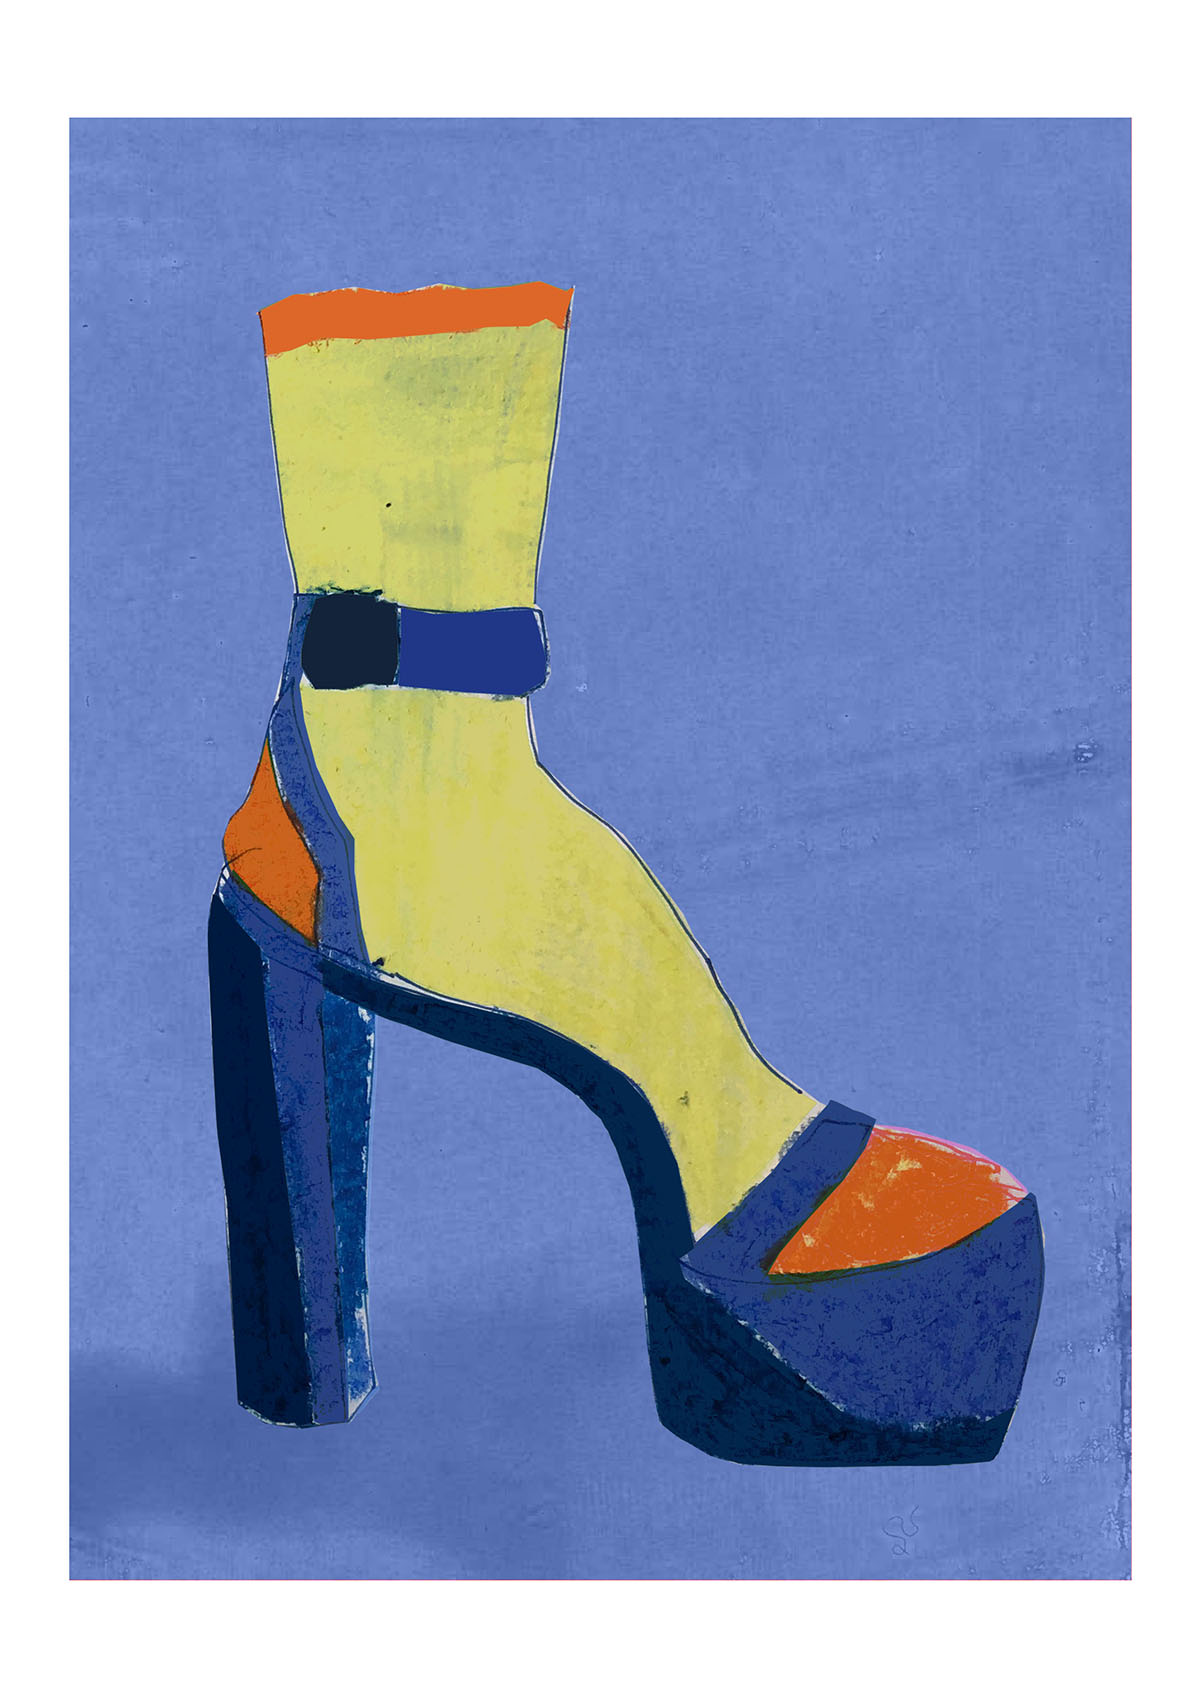 "Wedges and socks". An illustration conveying this title.